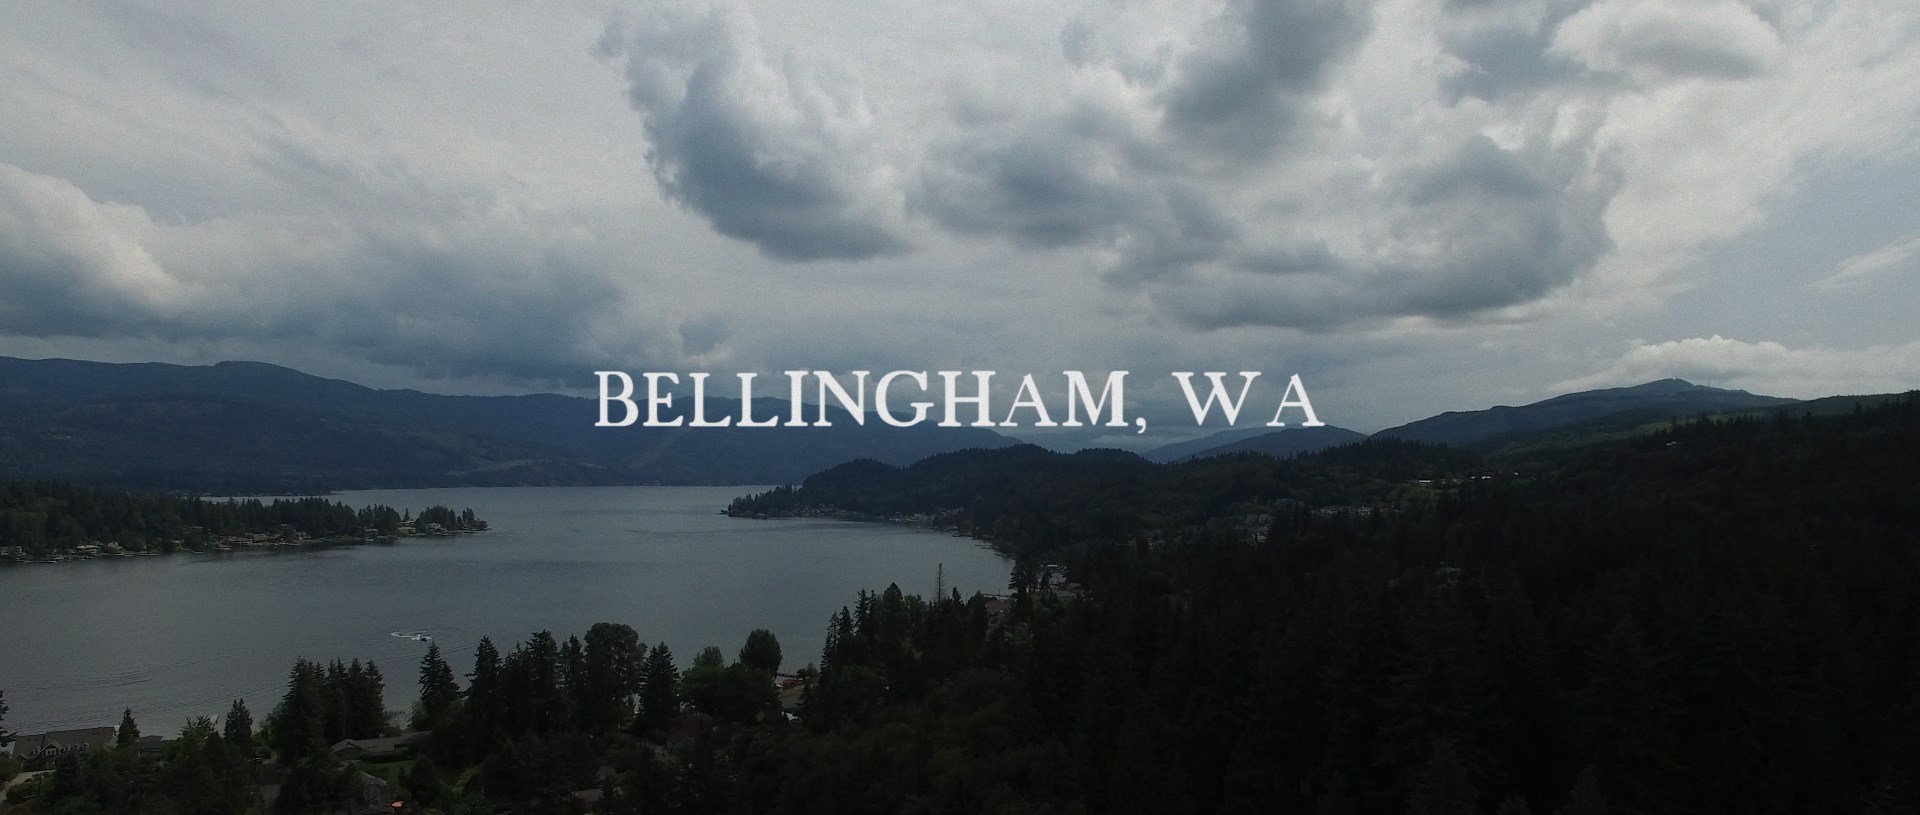 New Video: What I love about Bellingham